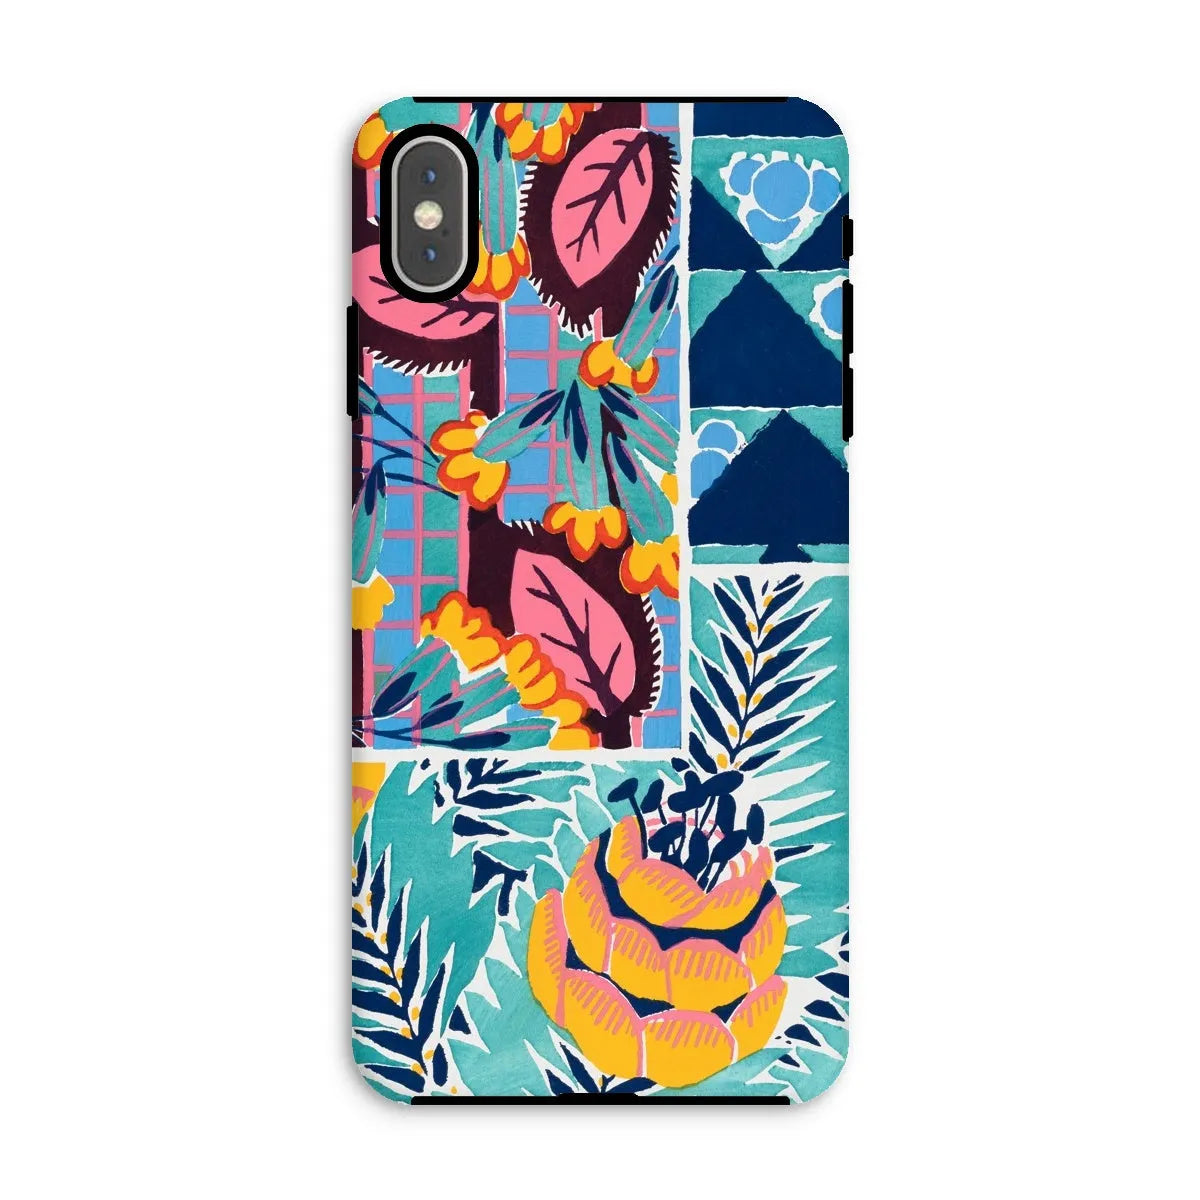 Fabric & Rugs - Pochoir Patterns Phone Case - E. A. Séguy - Iphone Xs Max / Matte - Mobile Phone Cases - Aesthetic Art